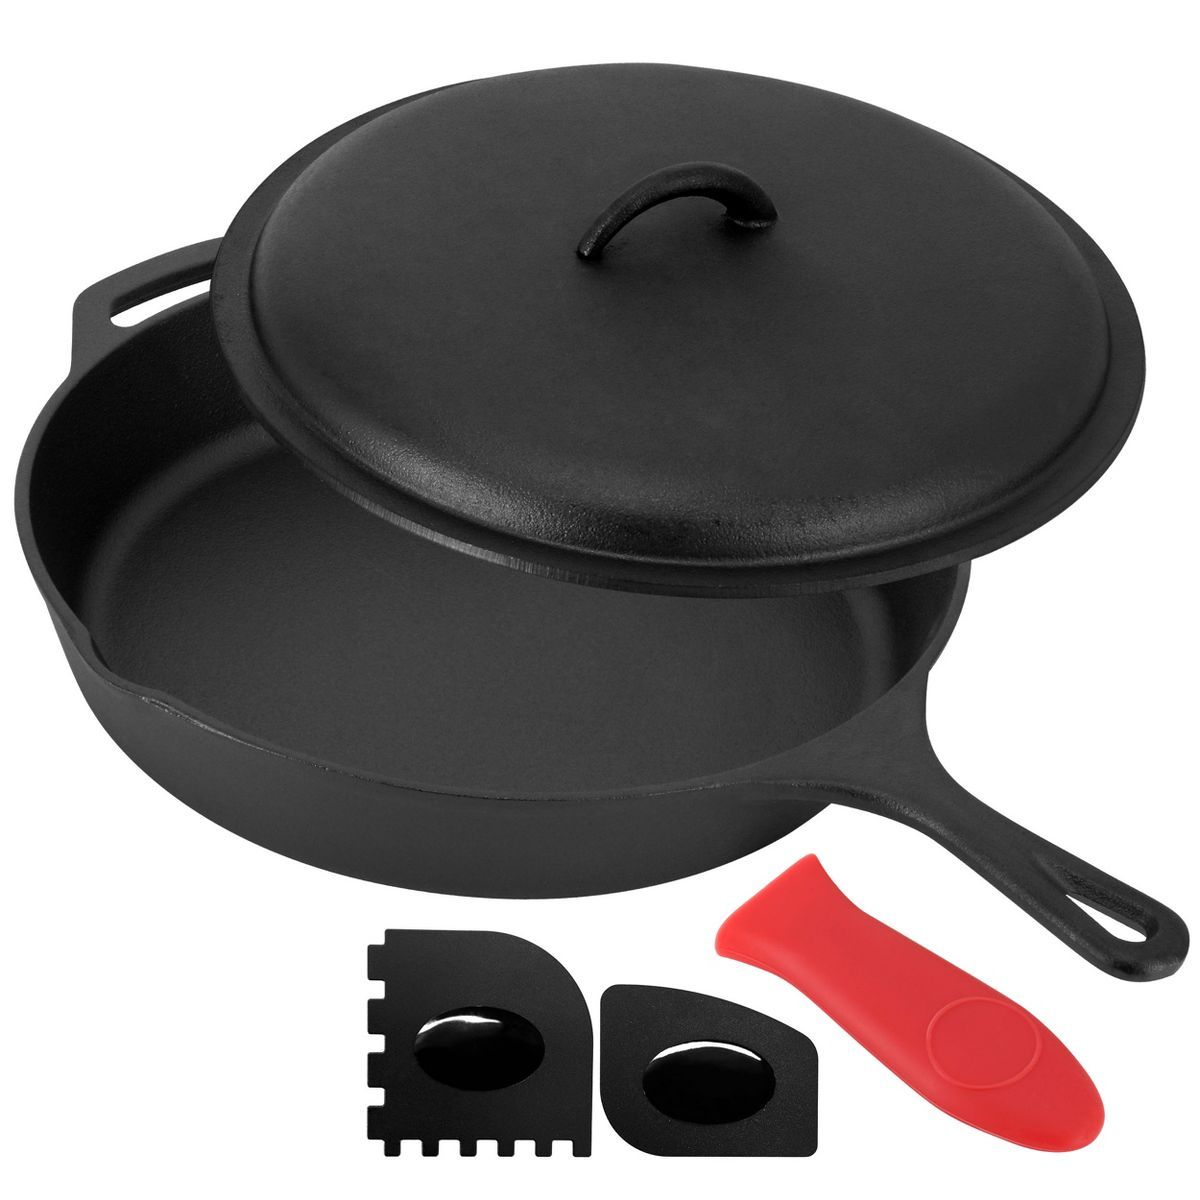 MegaChef 12 Inch Pre-Seasoned Cast Iron Skillet with Cast Iron Lid | Target